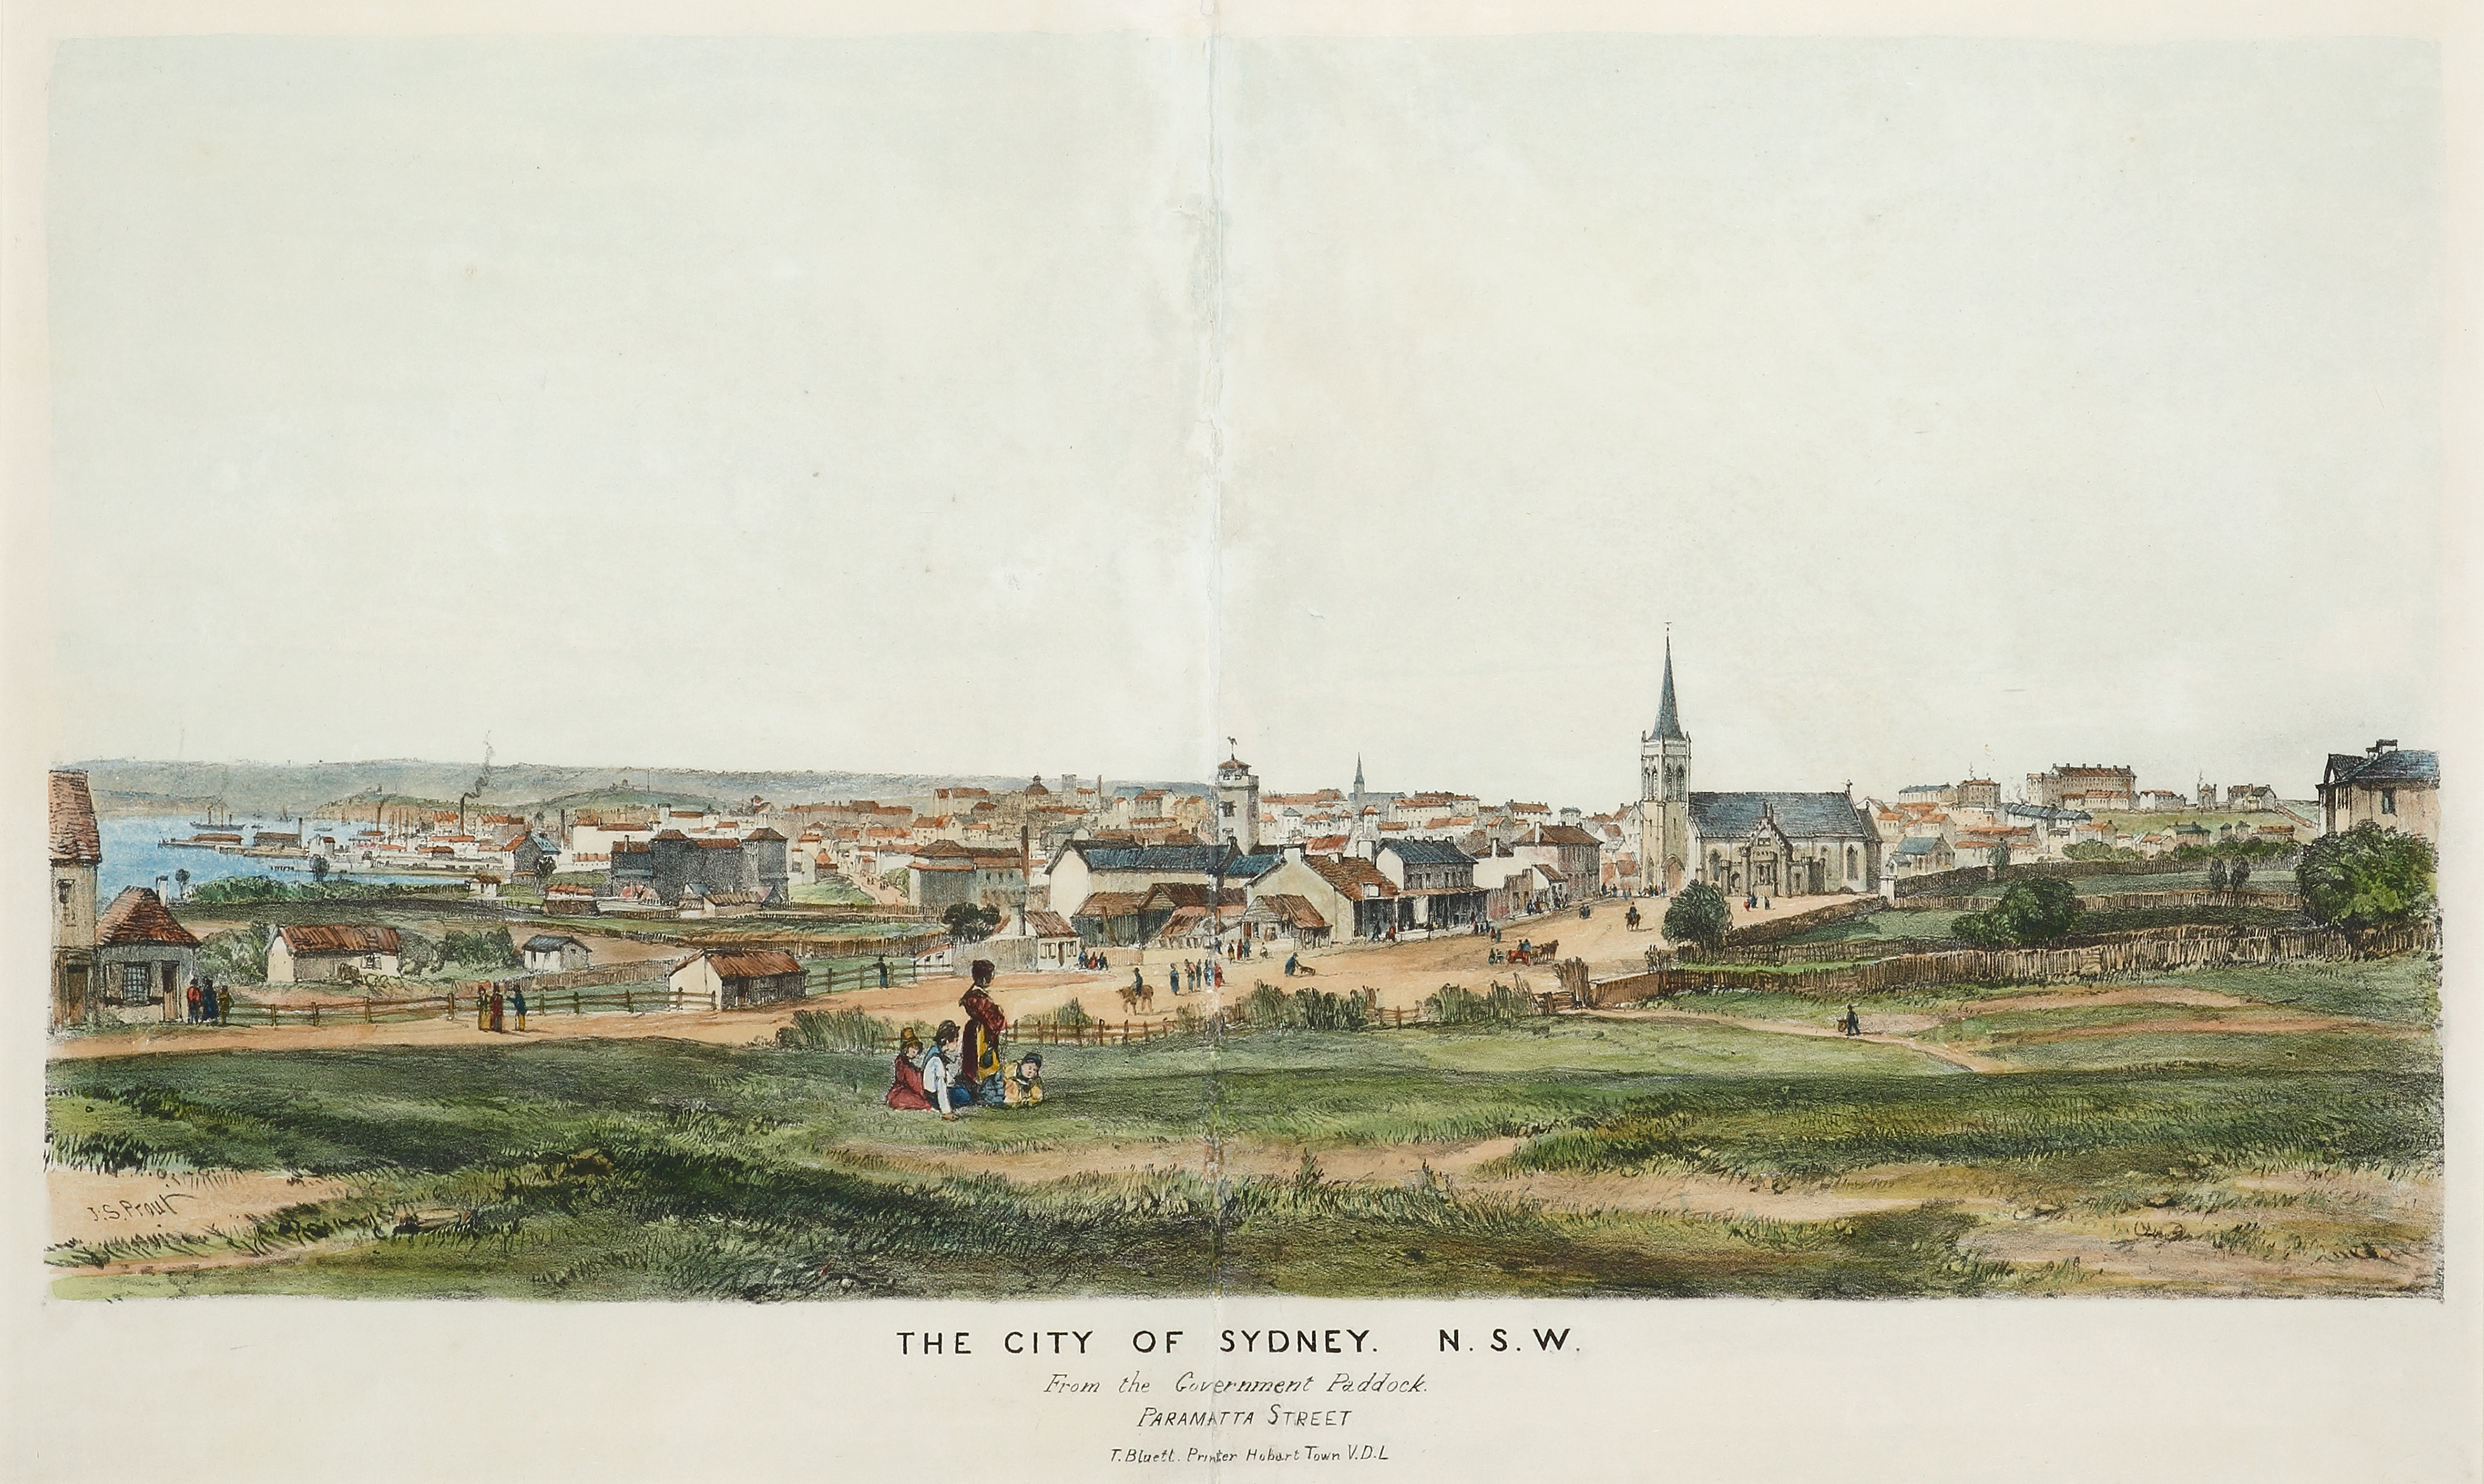 The City of Sydney, N.S.W., from the Government Paddock, Parramatta Street - Antique Print from 1844